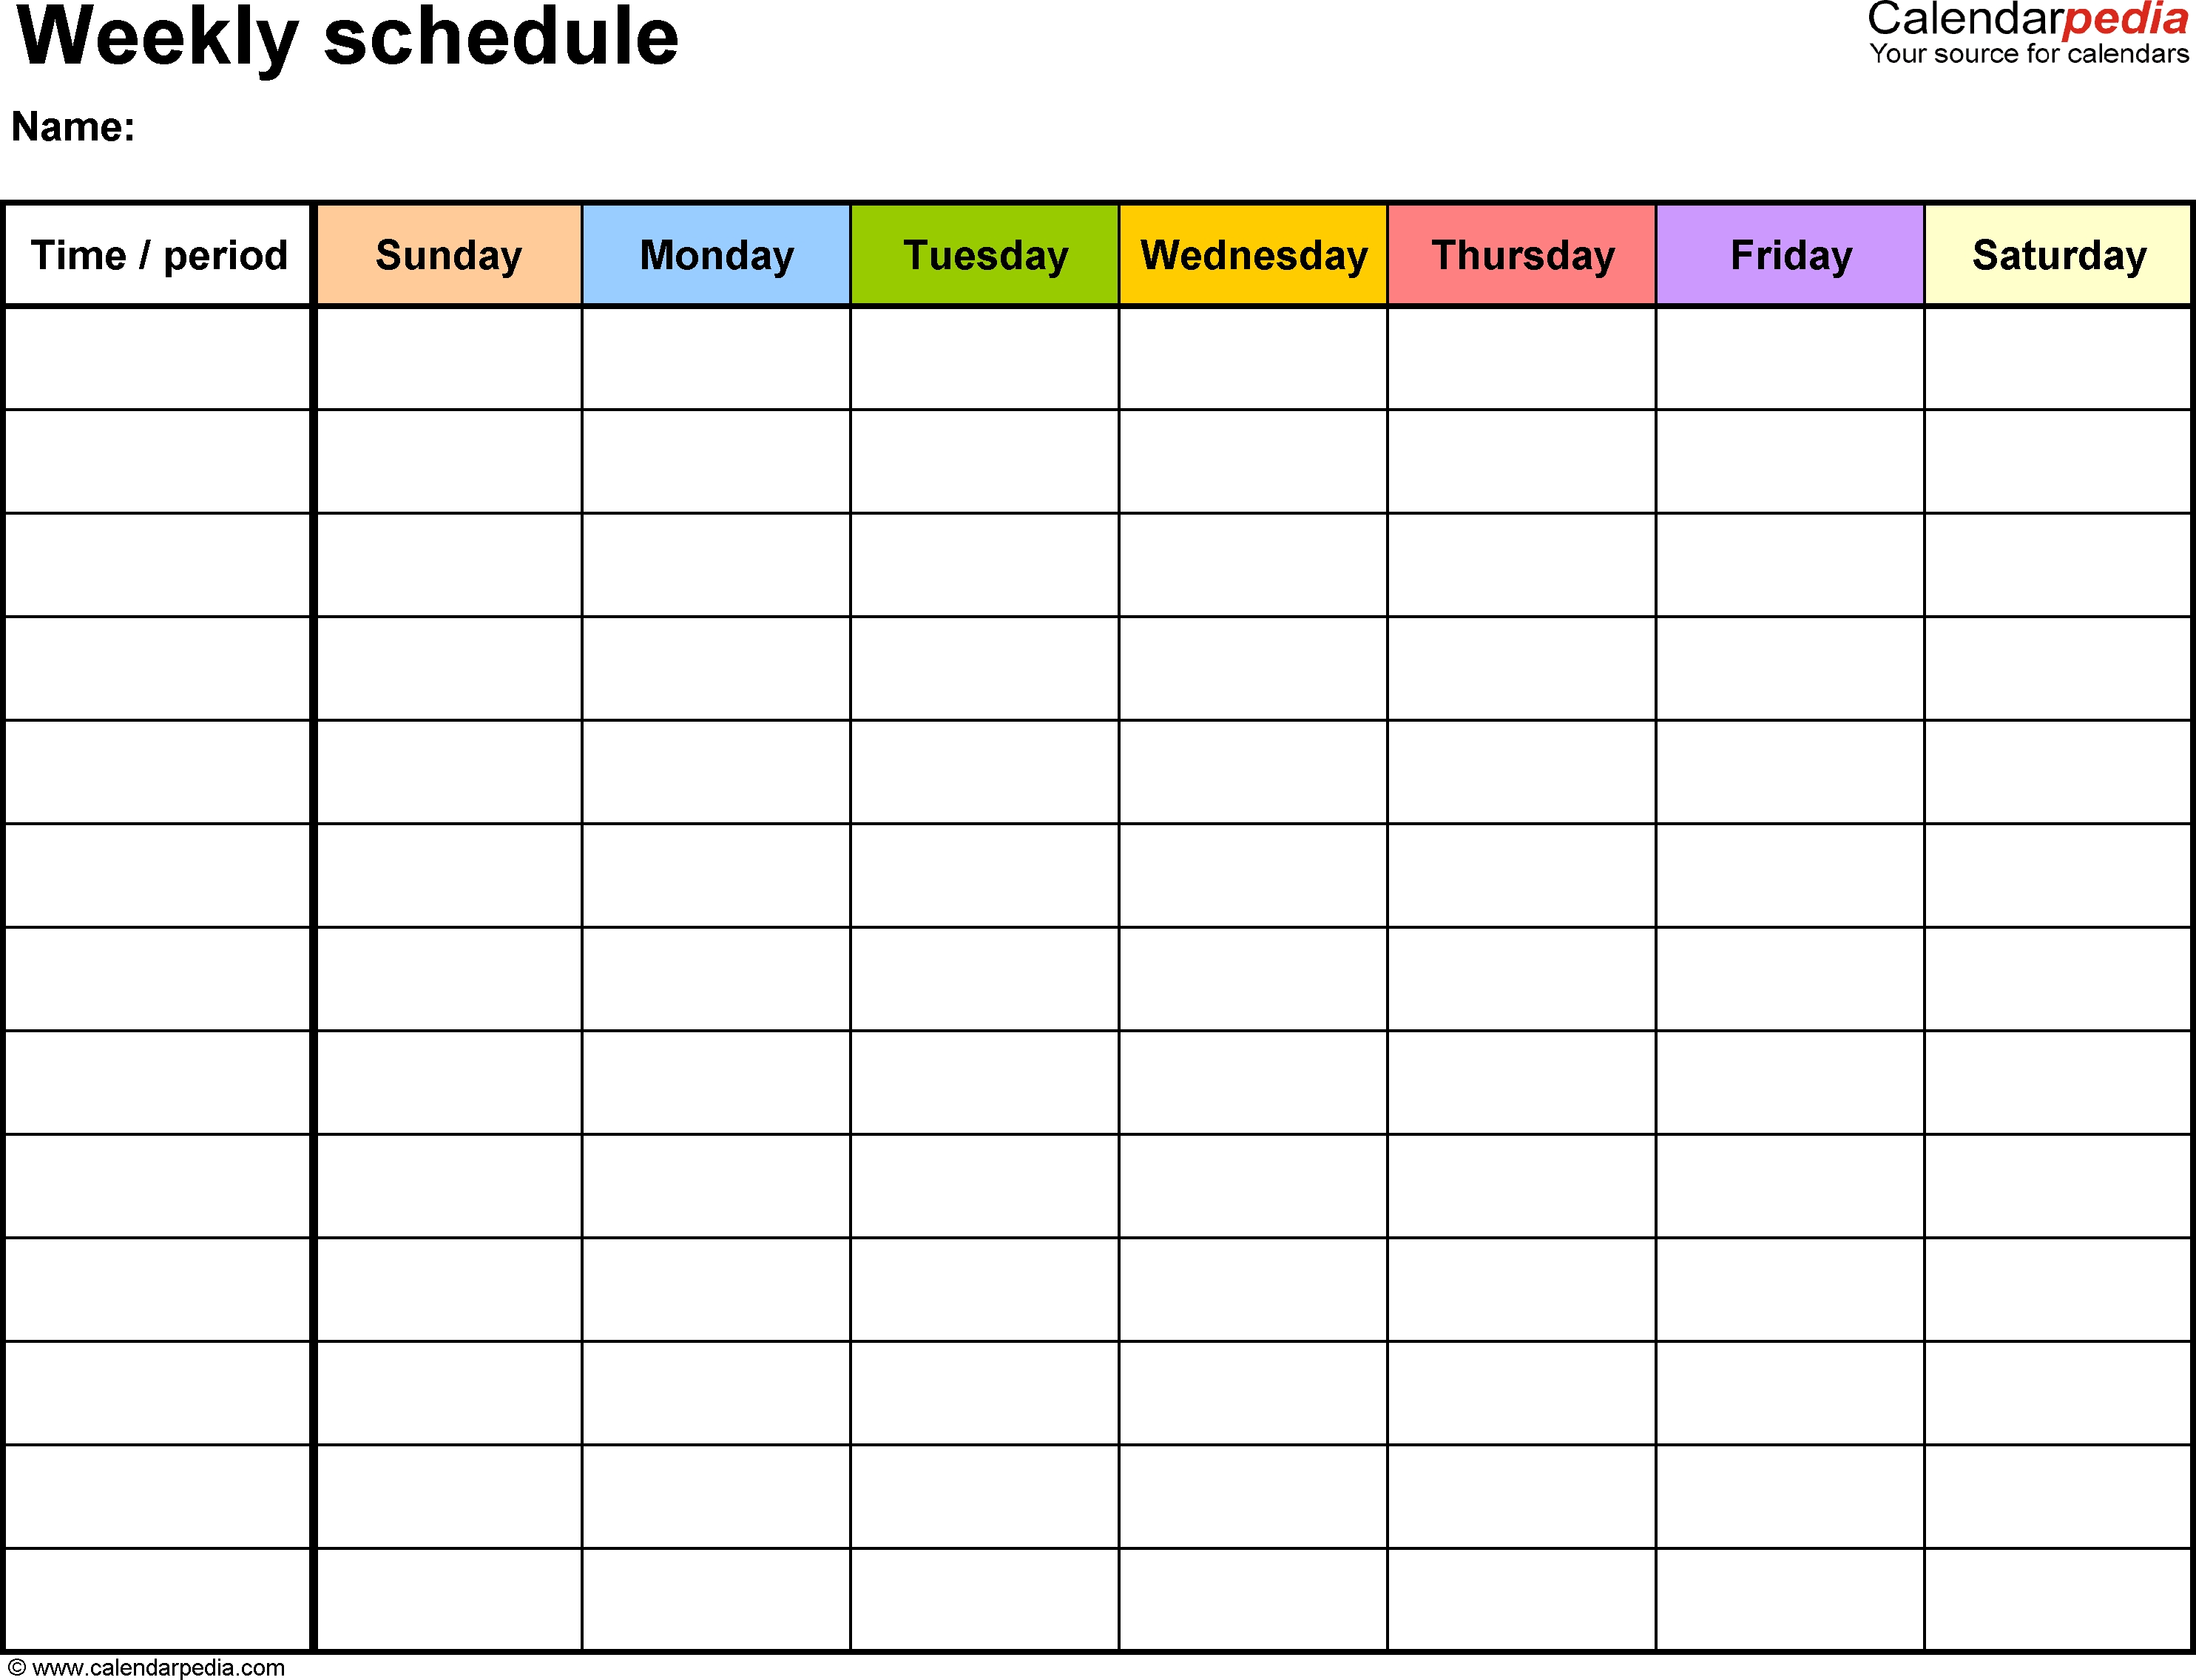 Weekly Schedule Template For Word Version 13: Landscape, 1 Monday Through Friday Word Calendar